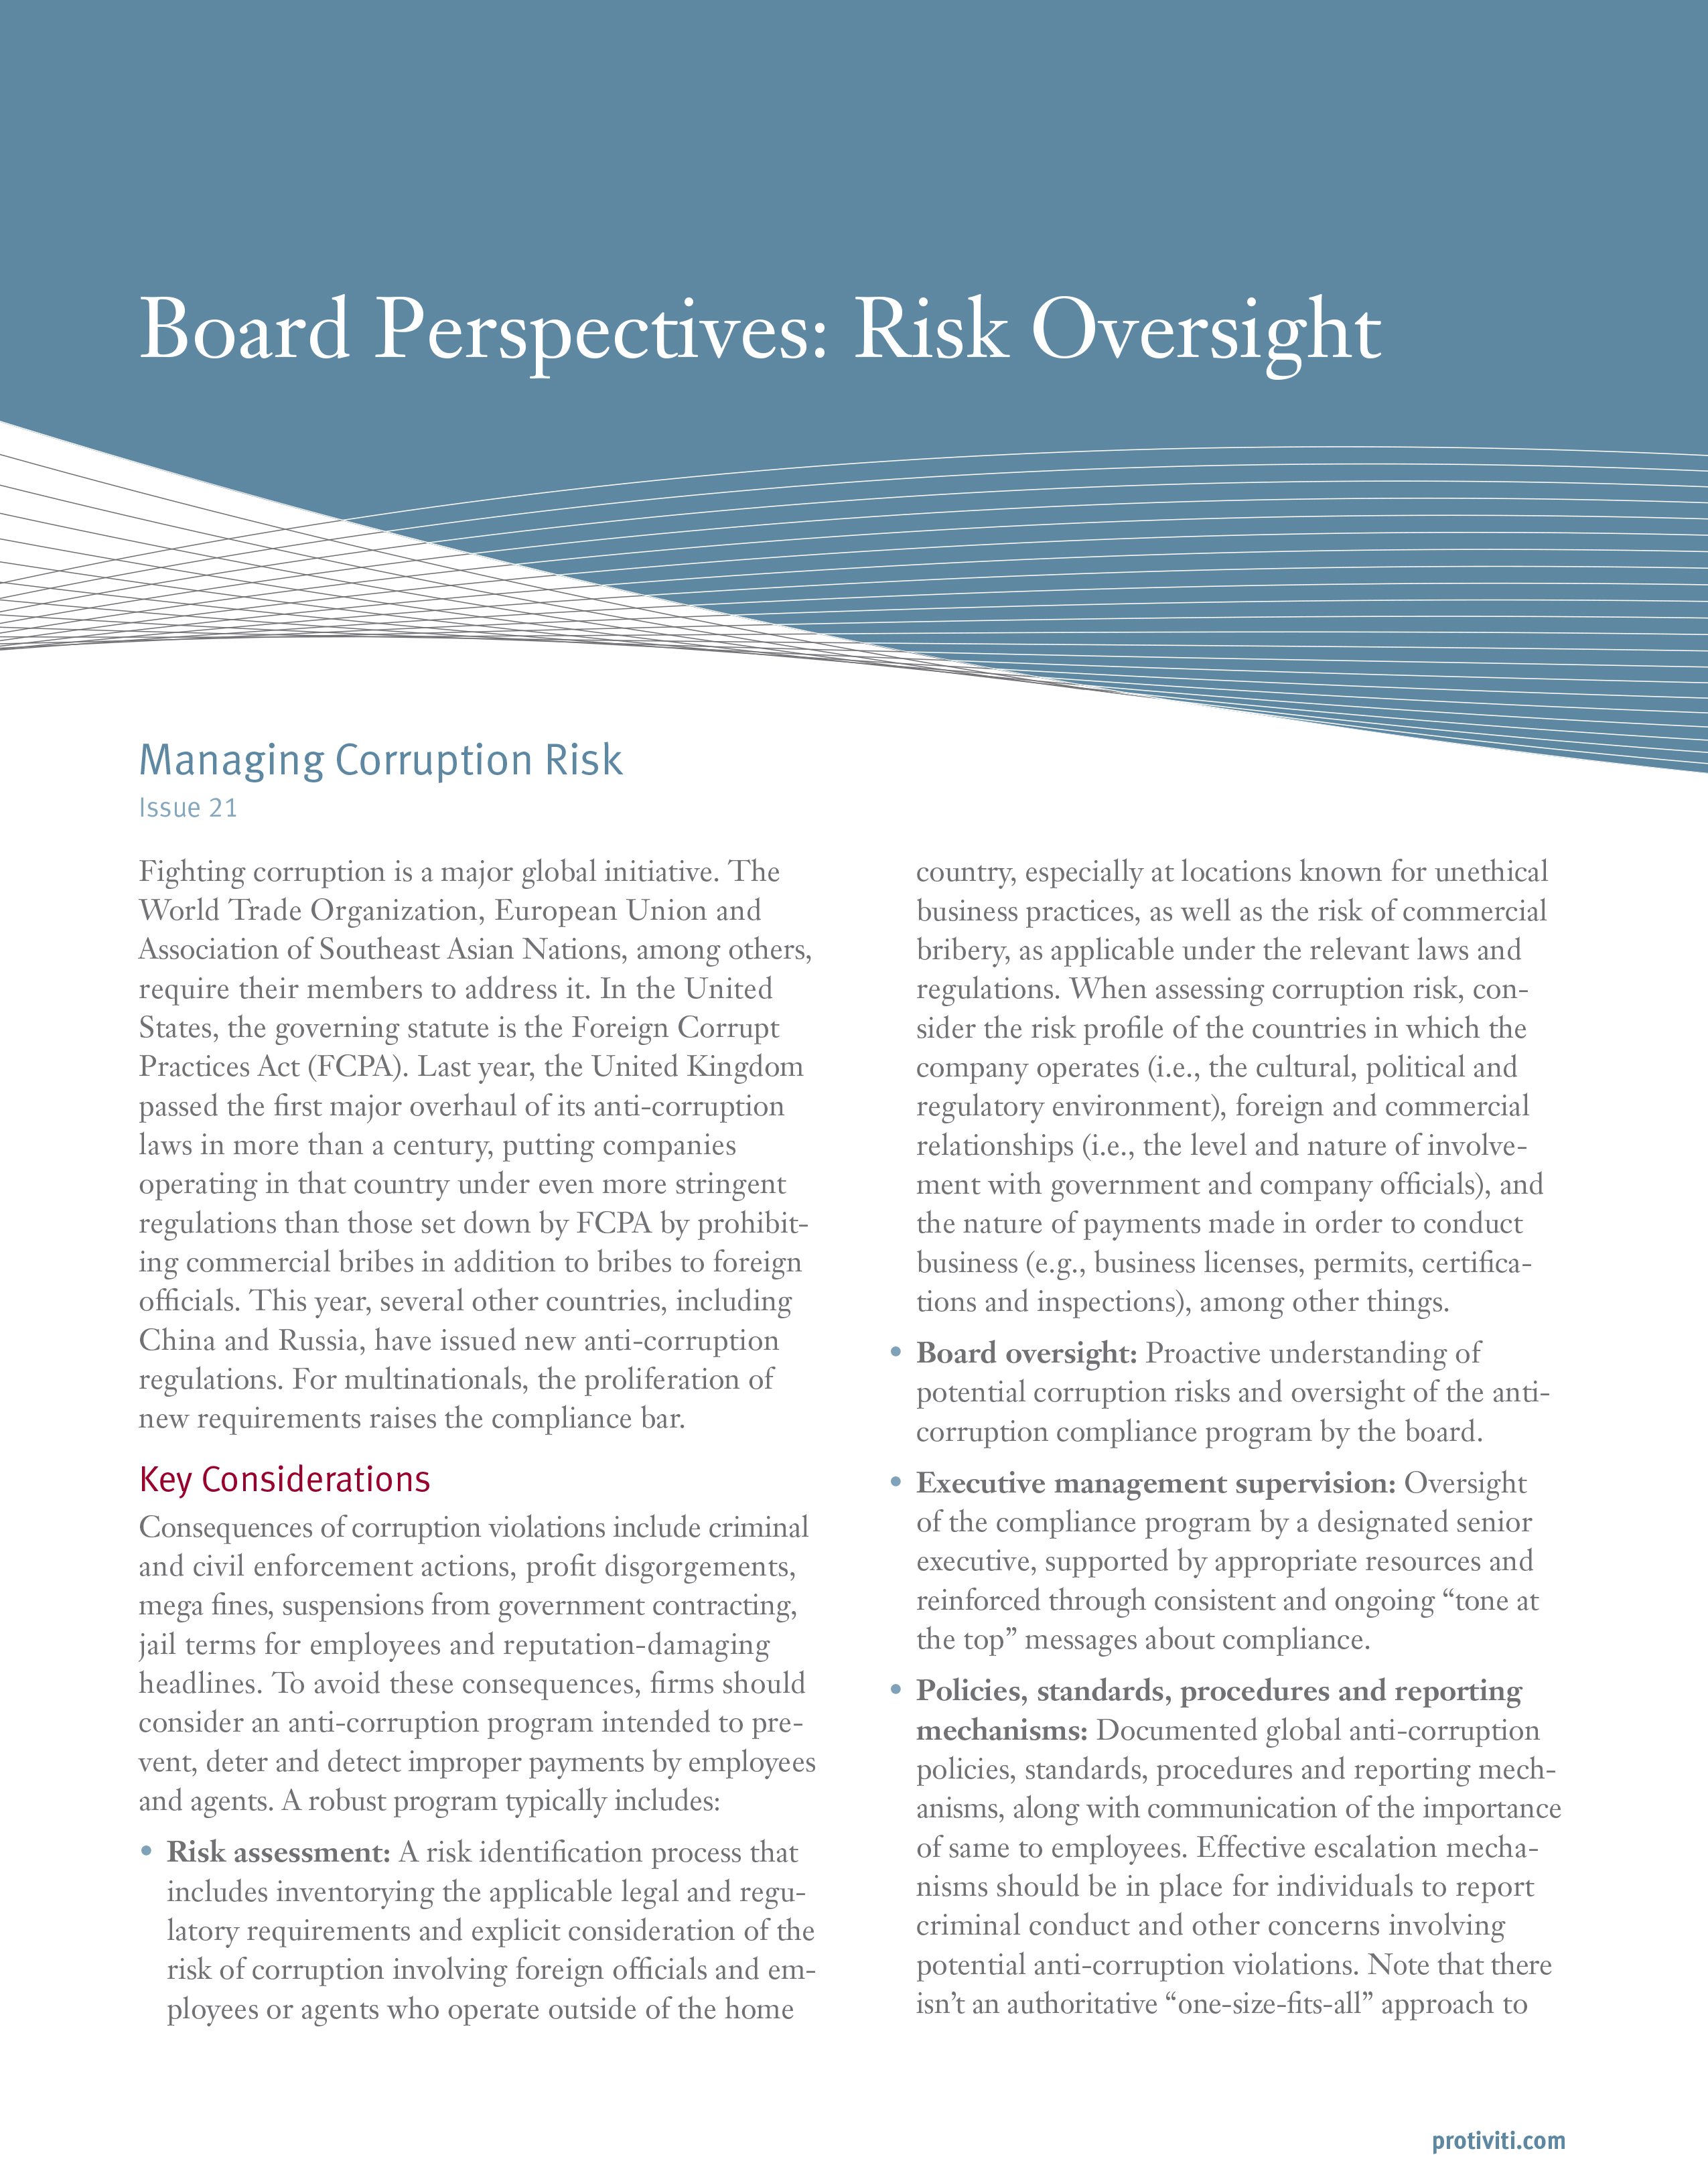 Screenshot of the first page of Managing Corruption Risk